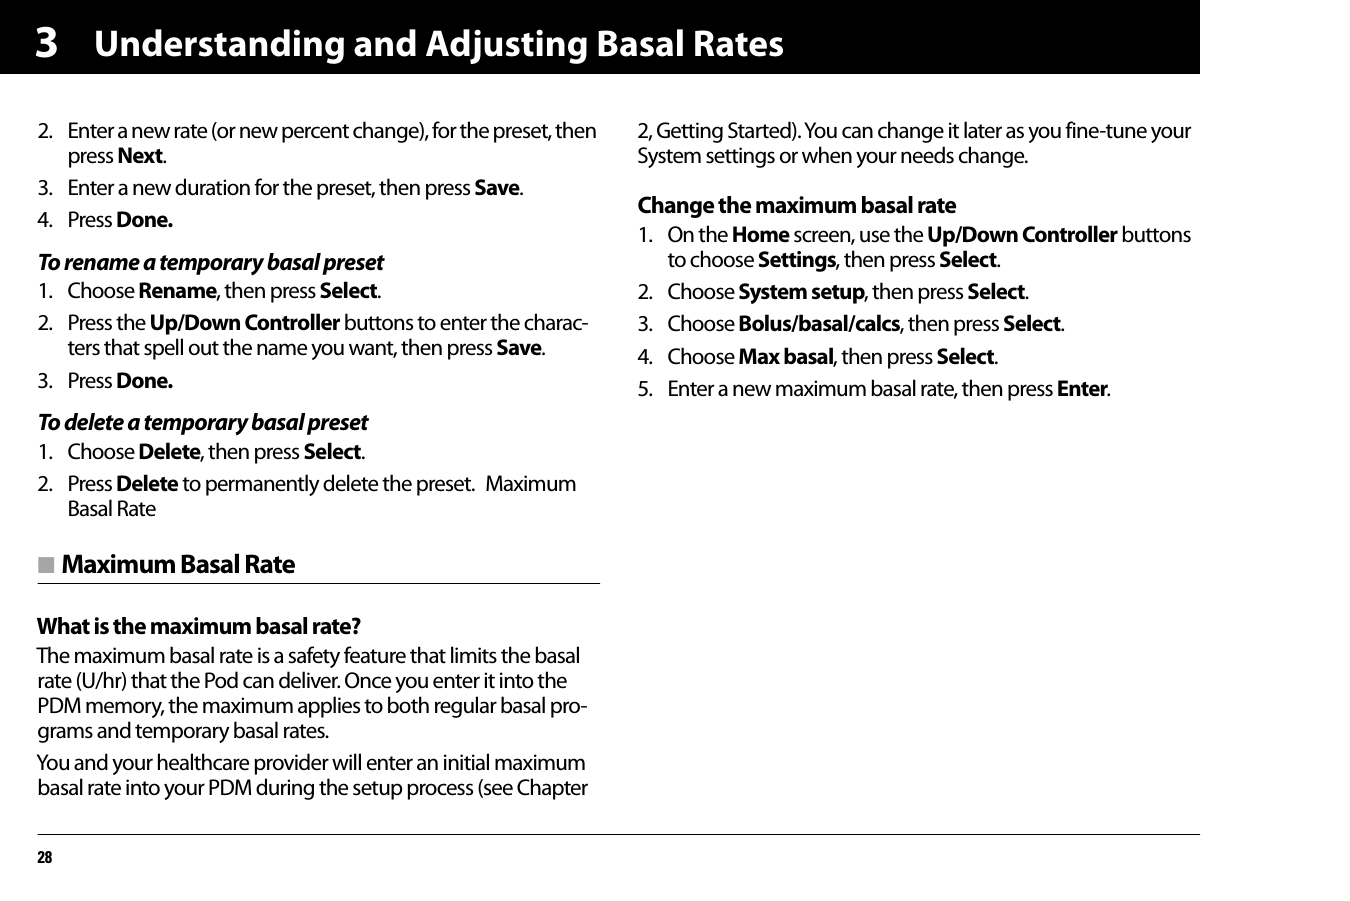 Understanding and Adjusting Basal Rates2832. Enter a new rate (or new percent change), for the preset, then press Next.3. Enter a new duration for the preset, then press Save.4. Press Done.To rename a temporary basal preset1. Choose Rename, then press Select.2. Press the Up/Down Controller buttons to enter the charac-ters that spell out the name you want, then press Save.3. Press Done.To delete a temporary basal preset1. Choose Delete, then press Select.2. Press Delete to permanently delete the preset.  Maximum Basal Raten Maximum Basal RateWhat is the maximum basal rate?The maximum basal rate is a safety feature that limits the basal rate (U/hr) that the Pod can deliver. Once you enter it into the PDM memory, the maximum applies to both regular basal pro-grams and temporary basal rates.You and your healthcare provider will enter an initial maximum basal rate into your PDM during the setup process (see Chapter 2, Getting Started). You can change it later as you fine-tune your System settings or when your needs change. Change the maximum basal rate1. On the Home screen, use the Up/Down Controller buttons to choose Settings, then press Select.2. Choose System setup, then press Select.3. Choose Bolus/basal/calcs, then press Select.4. Choose Max basal, then press Select.5. Enter a new maximum basal rate, then press Enter.